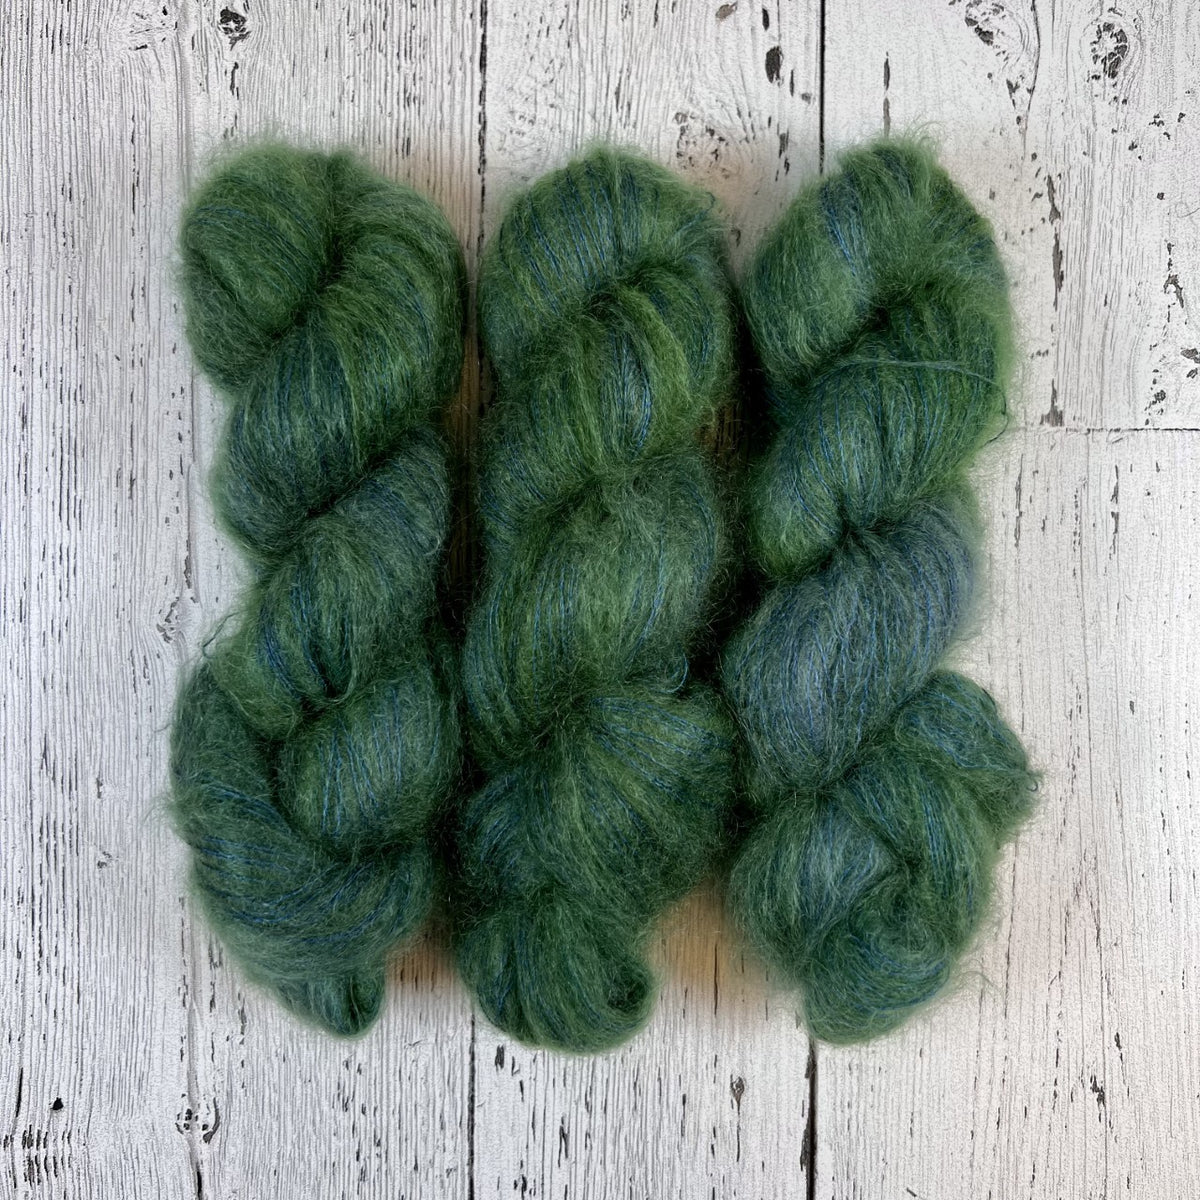 Blue Spruce - Delicacy Lace - Dyed Stock